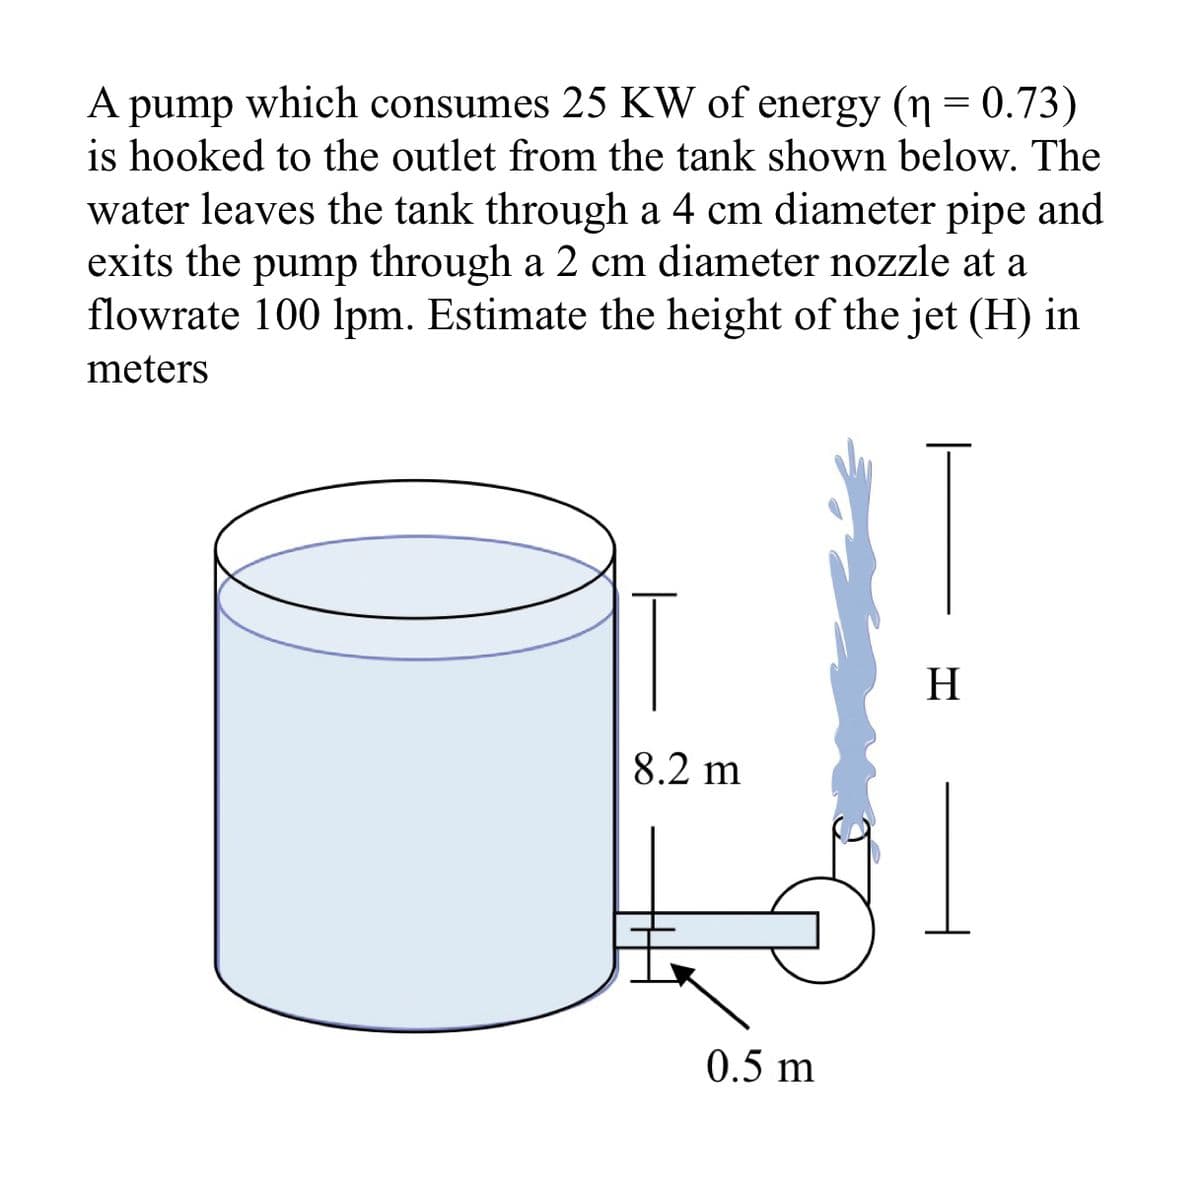 A pump which consumes 25 KW of energy (n = 0.73)
is hooked to the outlet from the tank shown below. The
water leaves the tank through a 4 cm diameter pipe and
exits the pump through a 2 cm diameter nozzle at a
flowrate 100 lpm. Estimate the height of the jet (H) in
meters
8.2 m
0.5 m
H